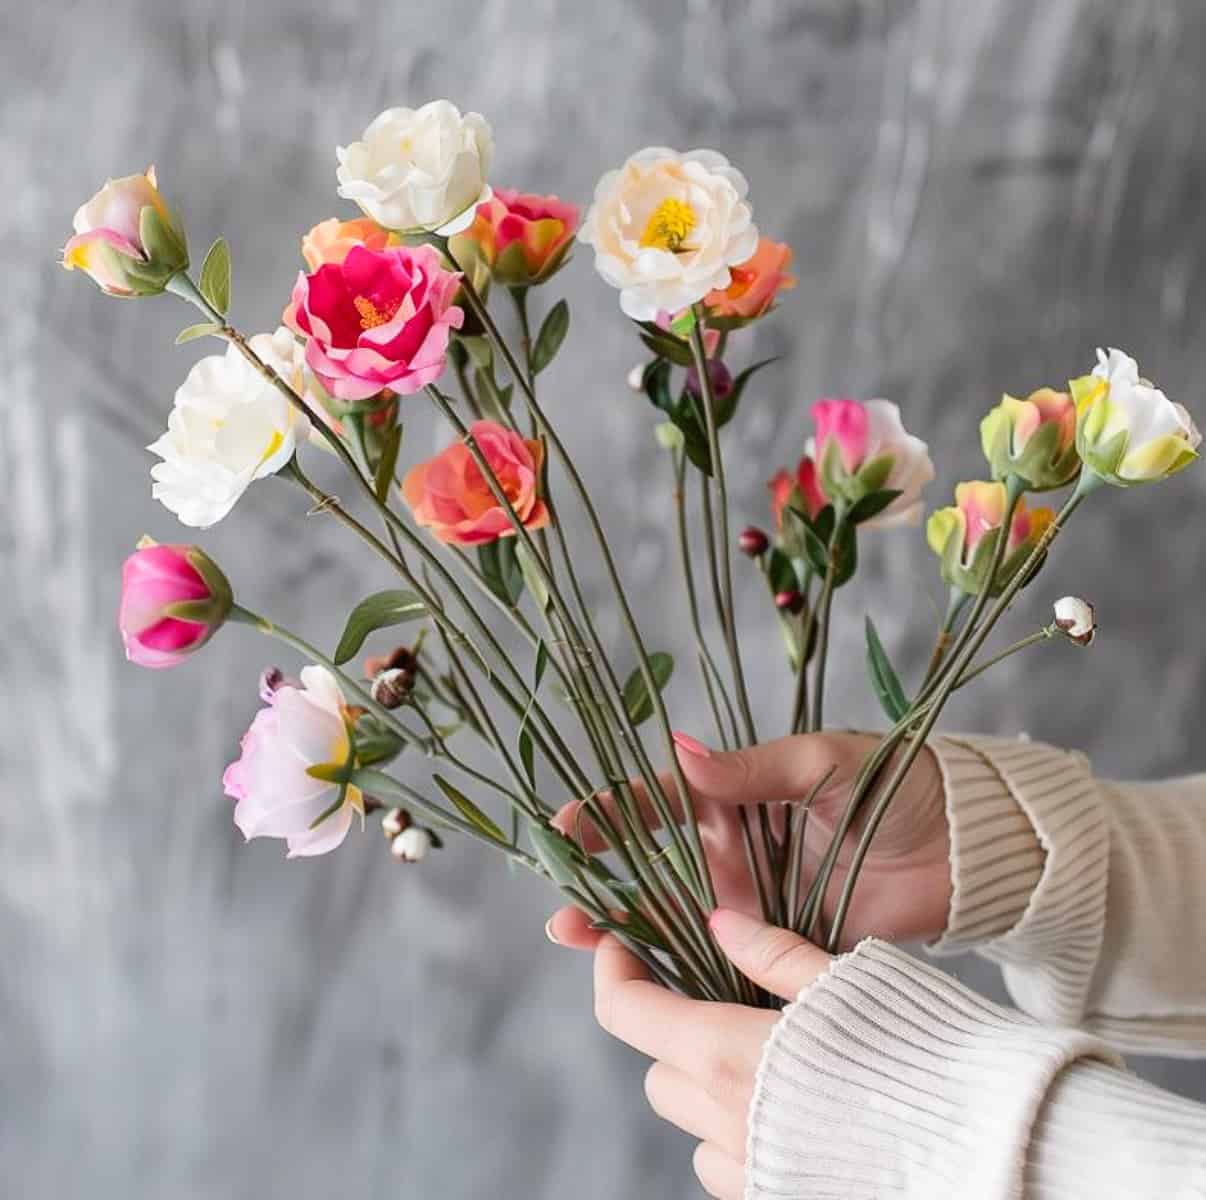 woman's hands holding several assorted flower stems